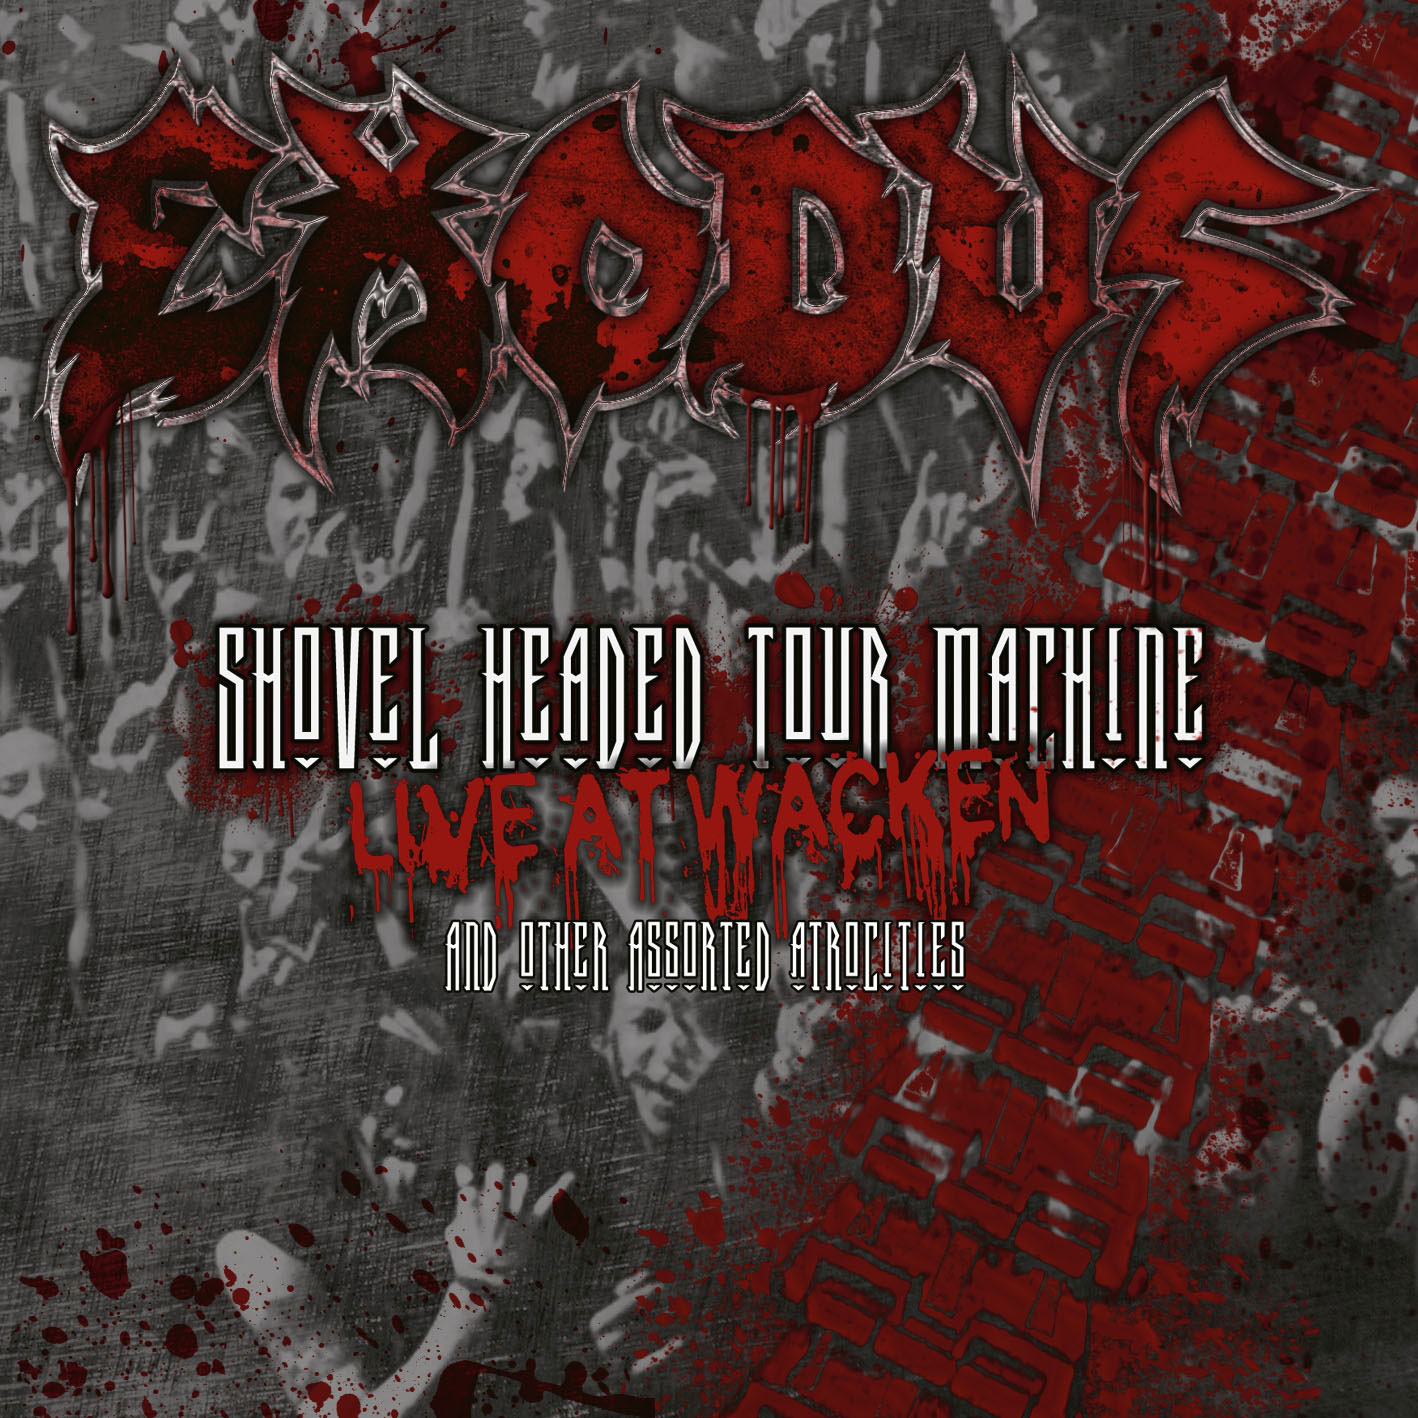 Exodus: Shovel Headed Tour Machine (Live at Wacken and Other Assorted Atrocities)